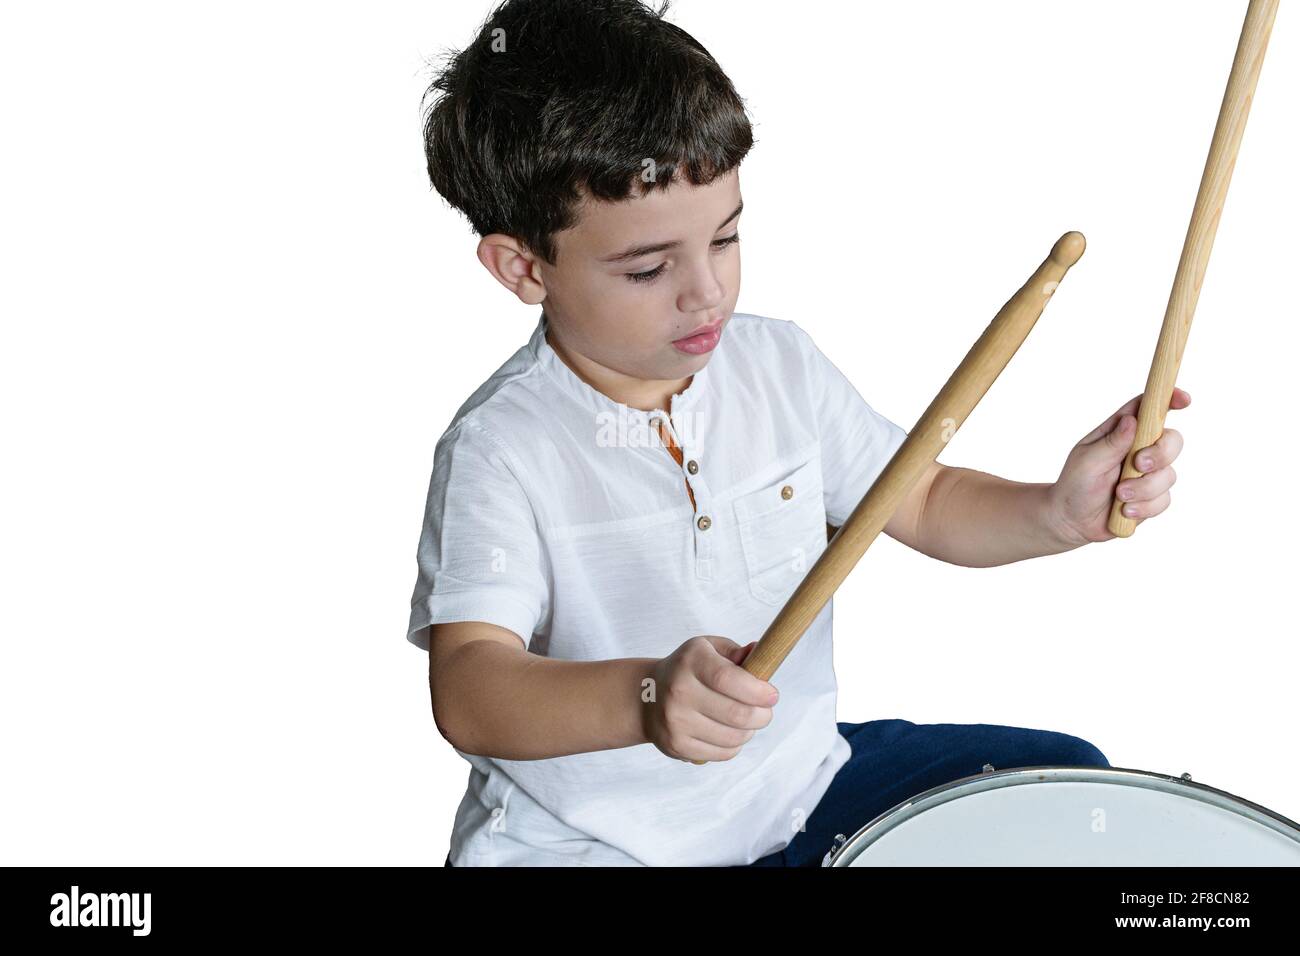 7 year old child with his dumsticks ready to play the drums. White background. Stock Photo